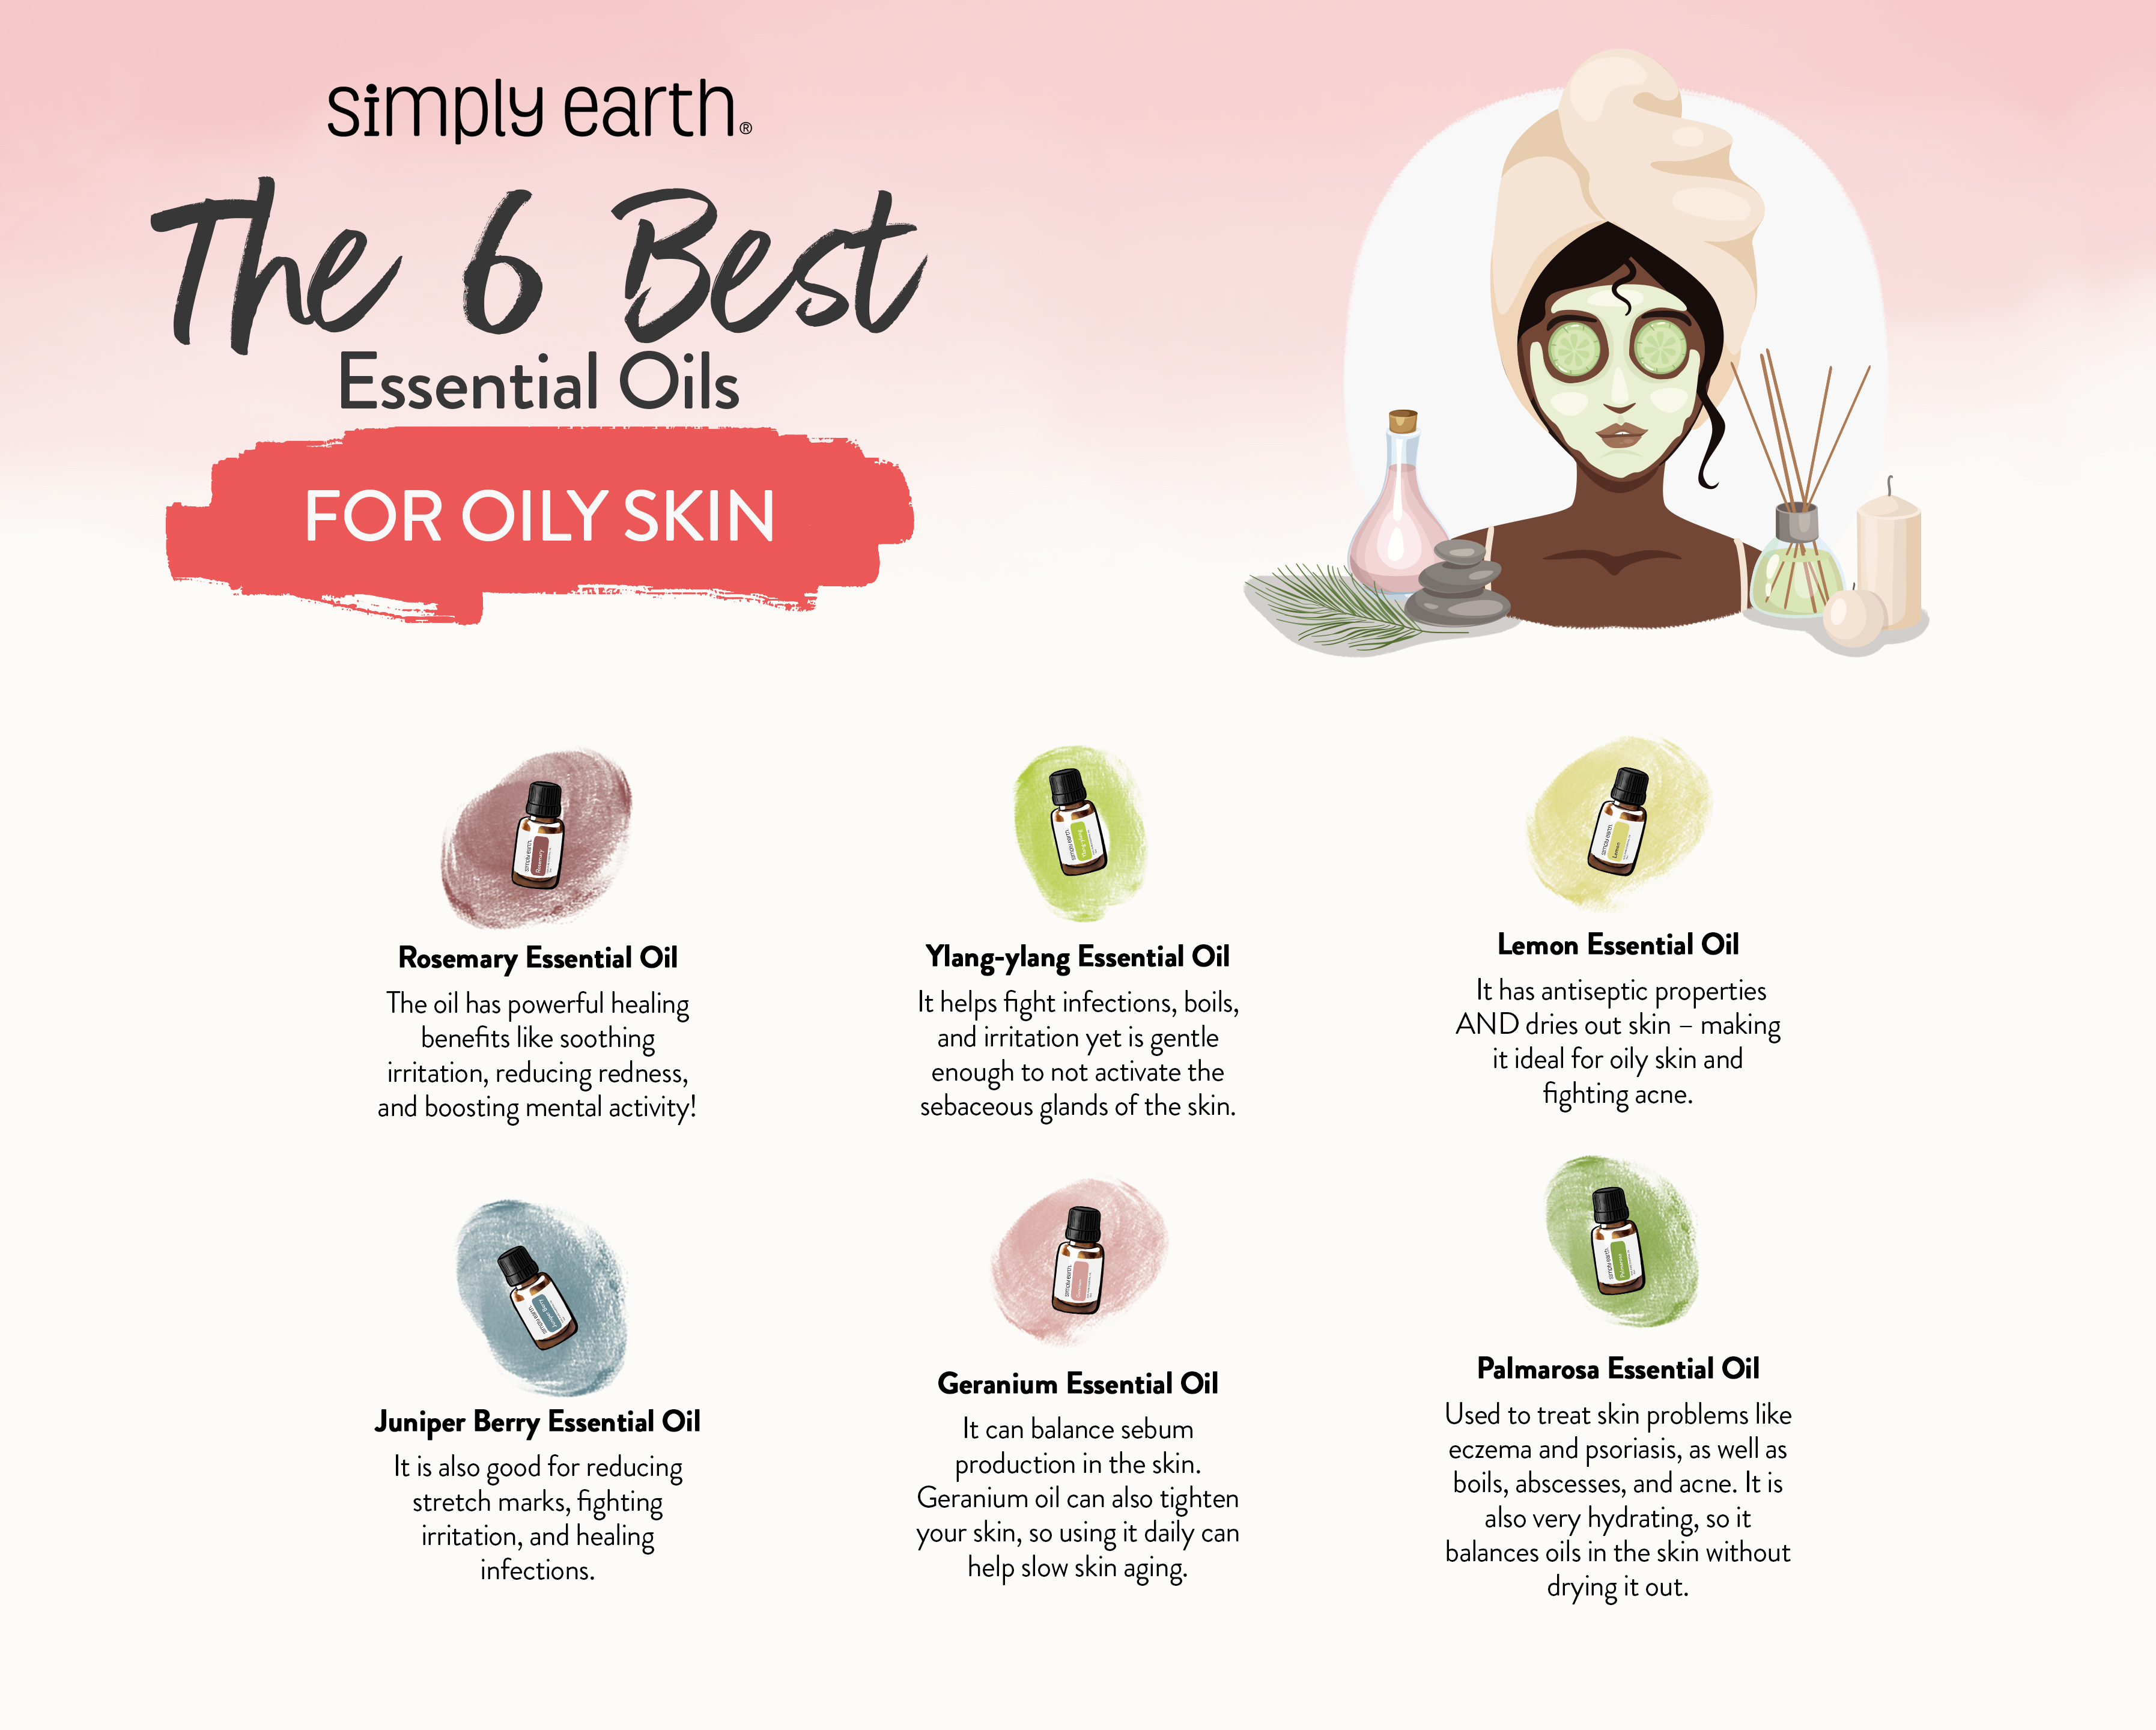 6 Best Essential Oils for Oily Skin - Simply Earth Blog